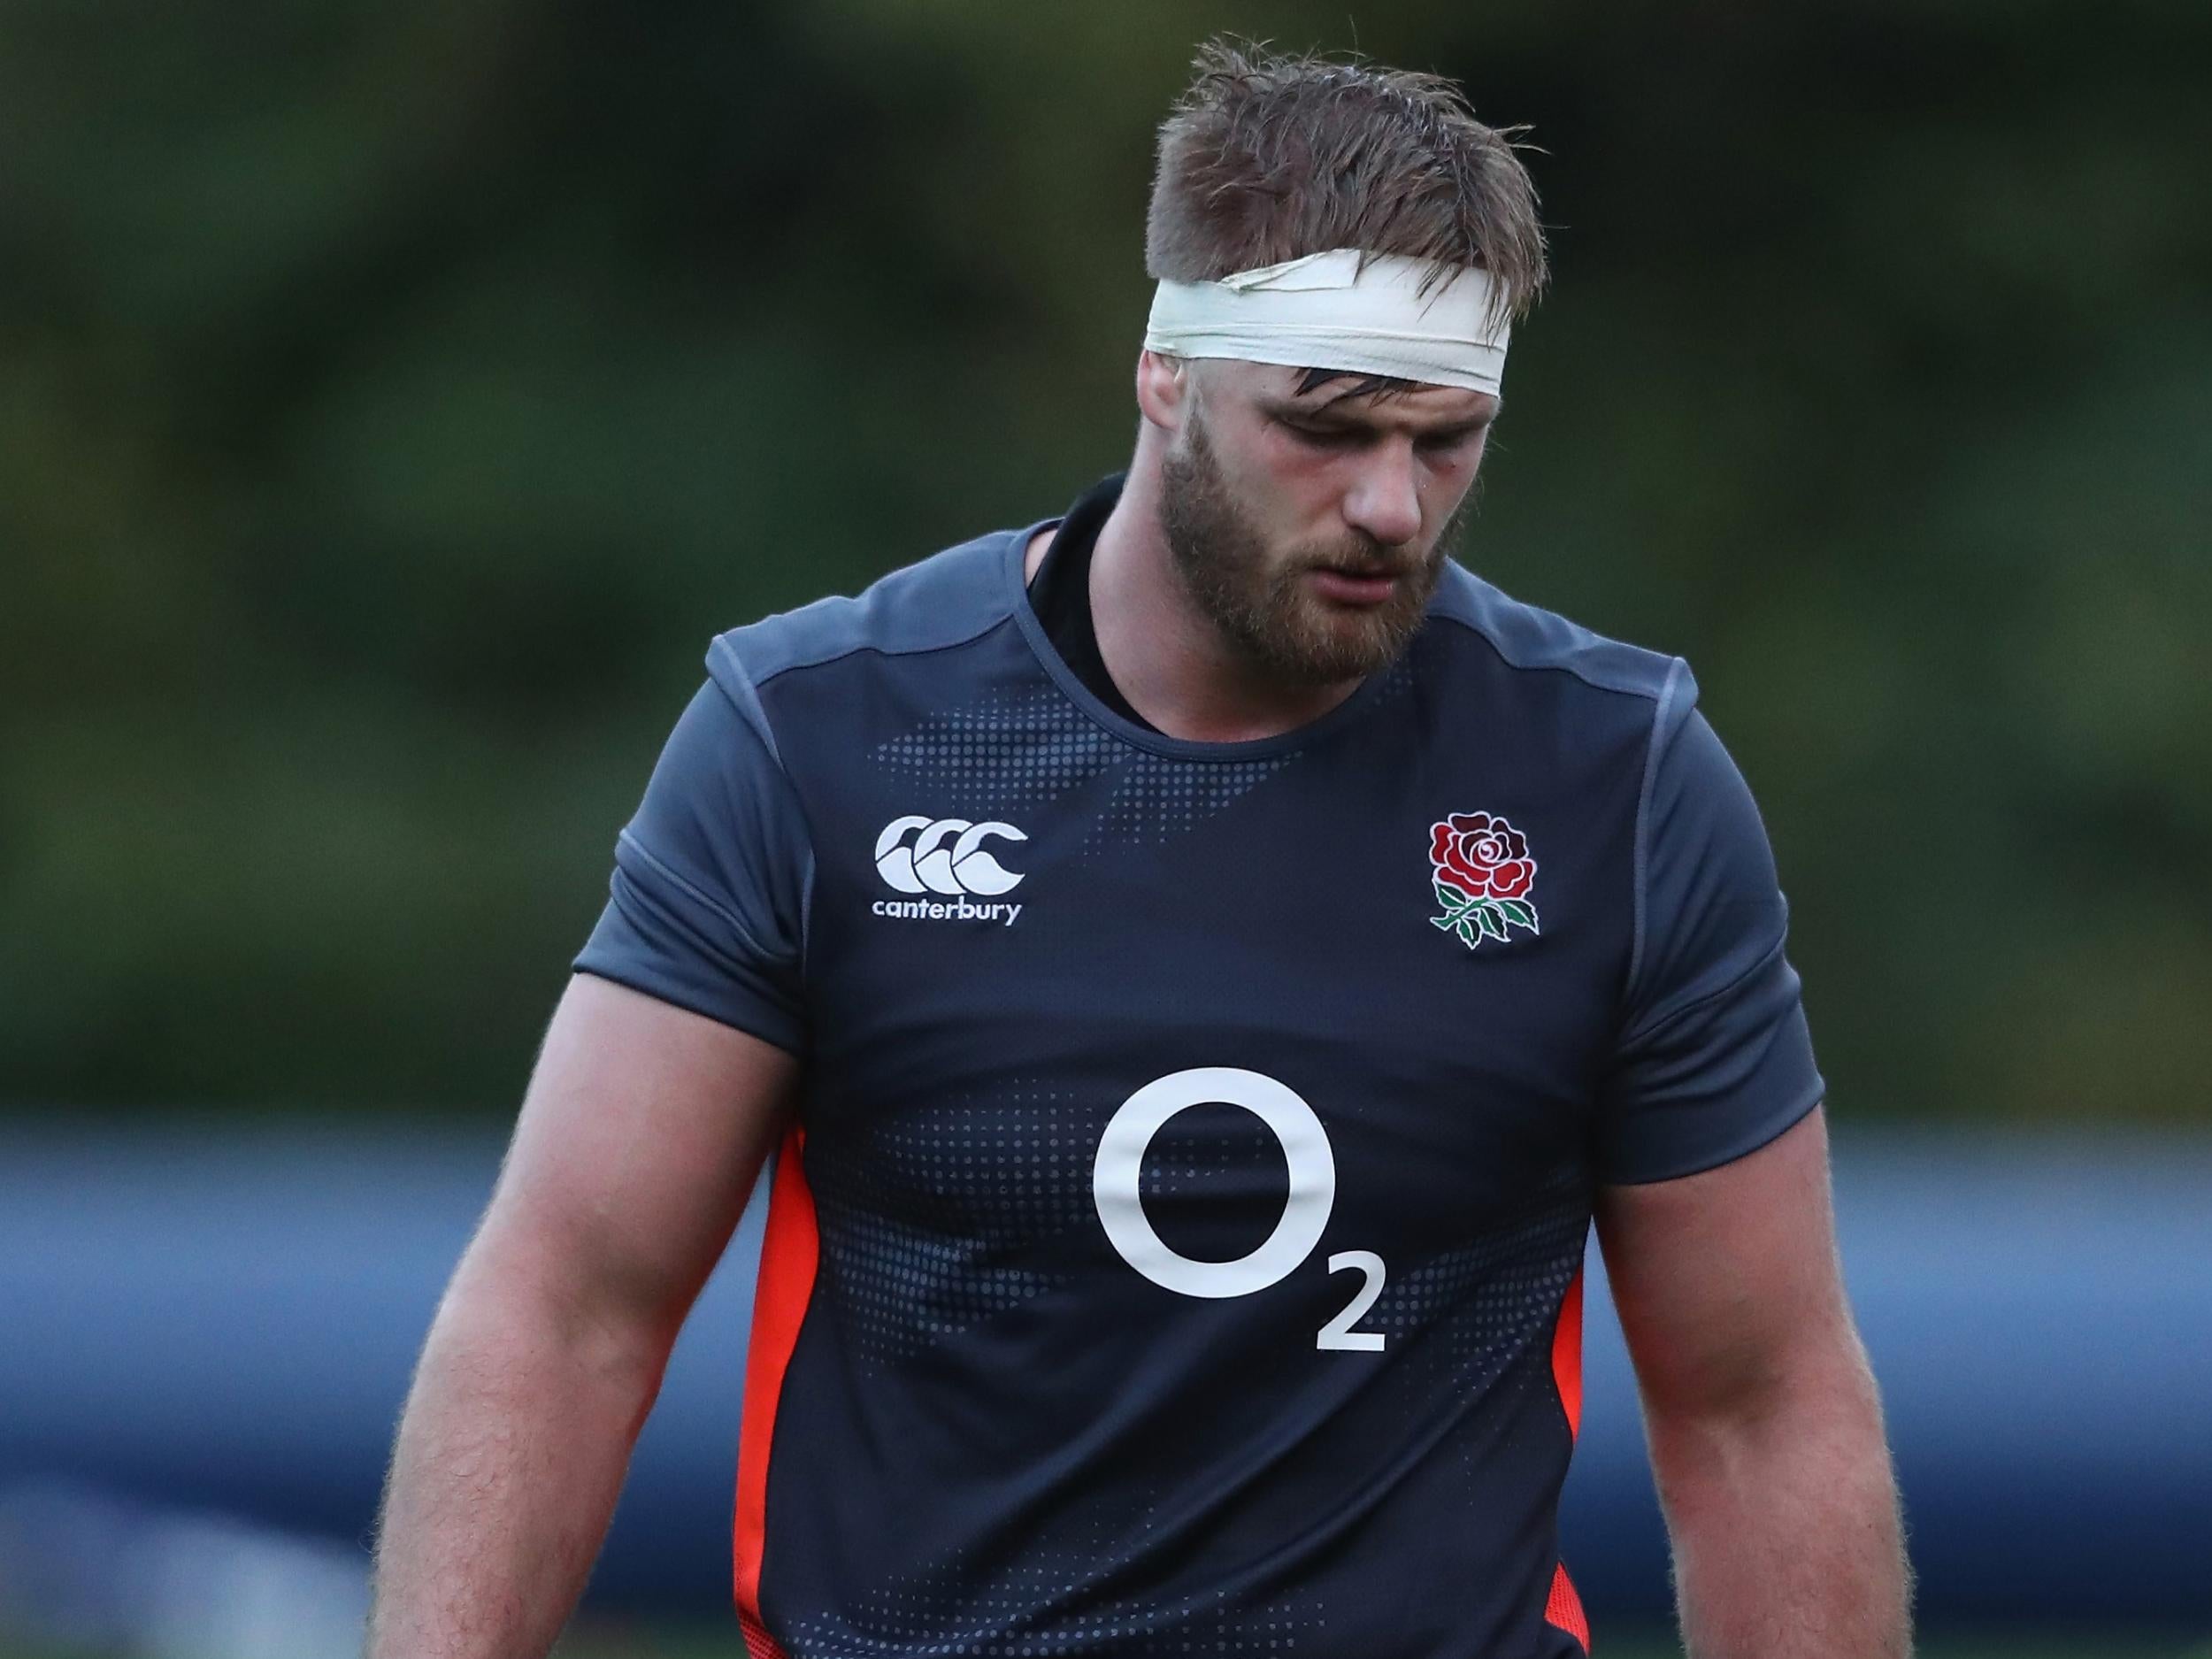 George Kruis will miss the rest of the season